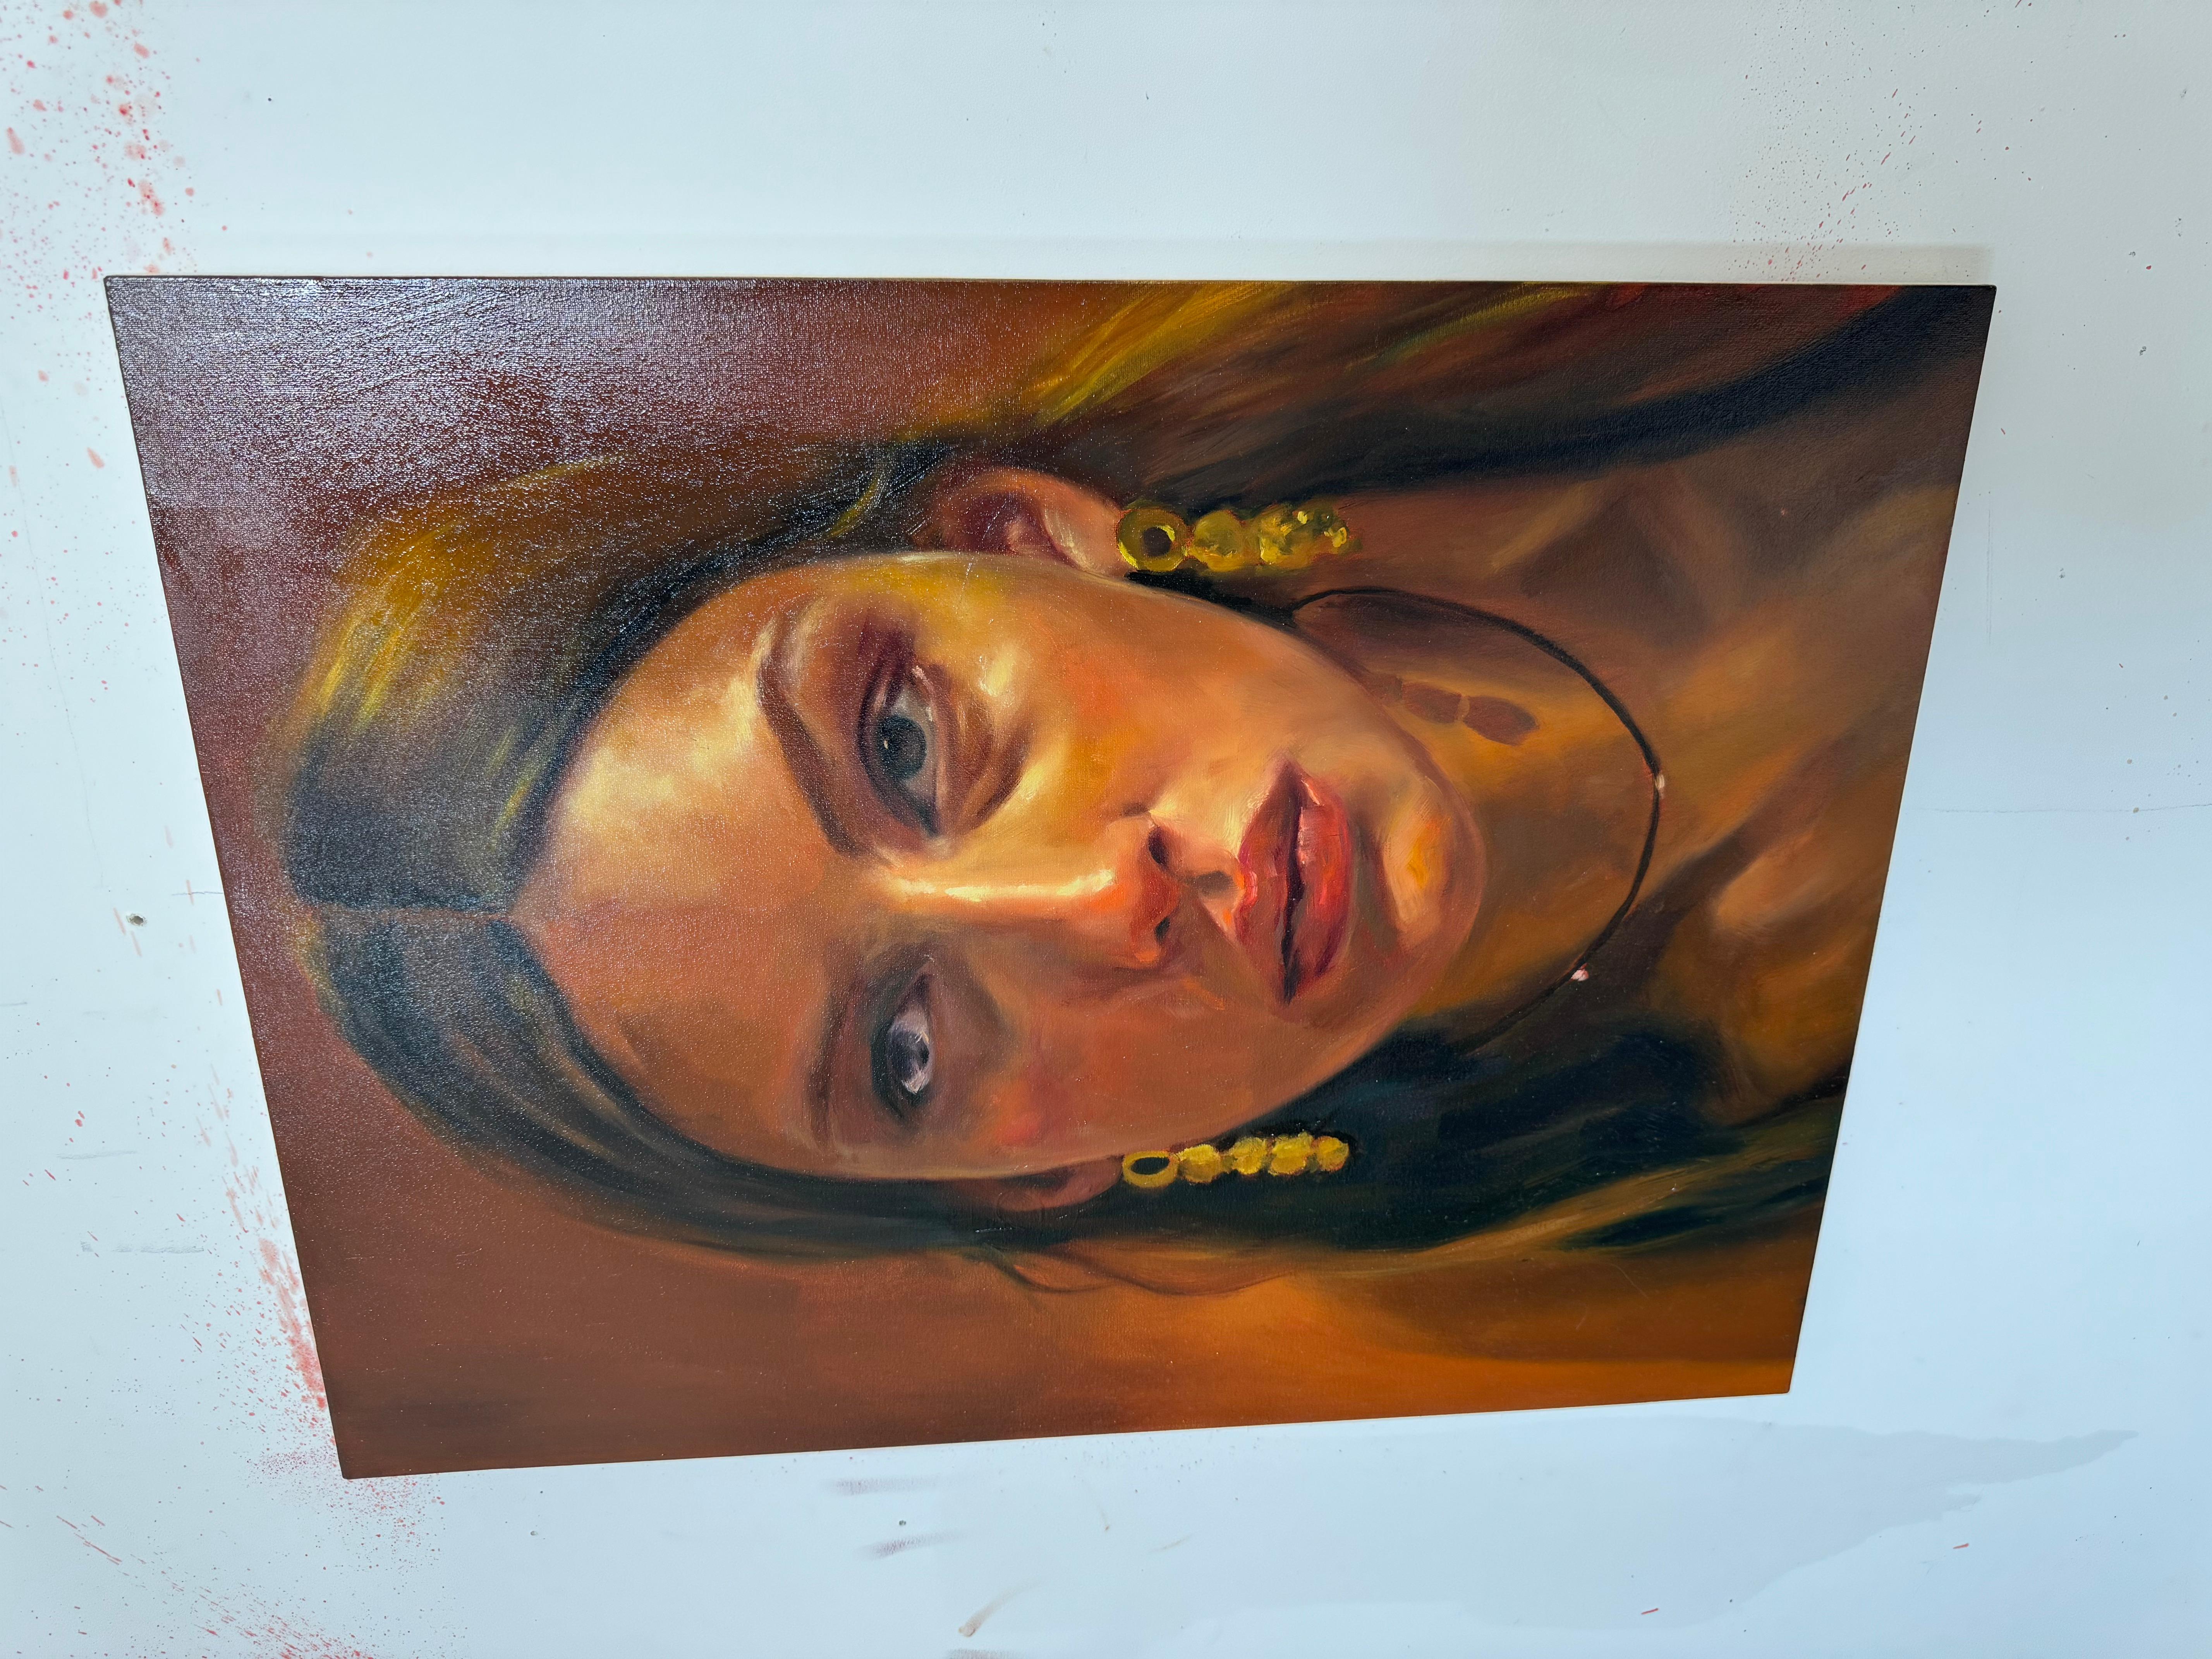 From my portrait series --- this painting photographs differently in different lighting so I've tried to include a few different images. More photos can be provided upon request!